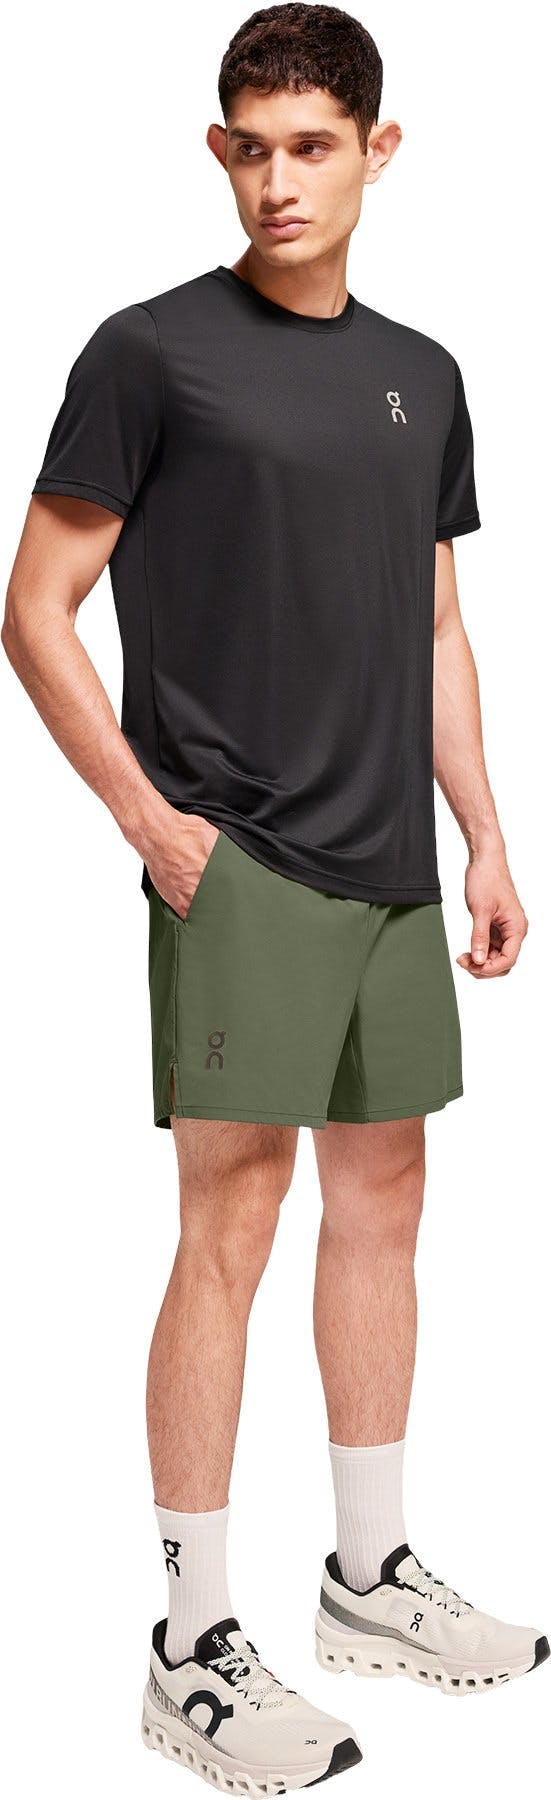 Product image for Essential Shorts - Men's